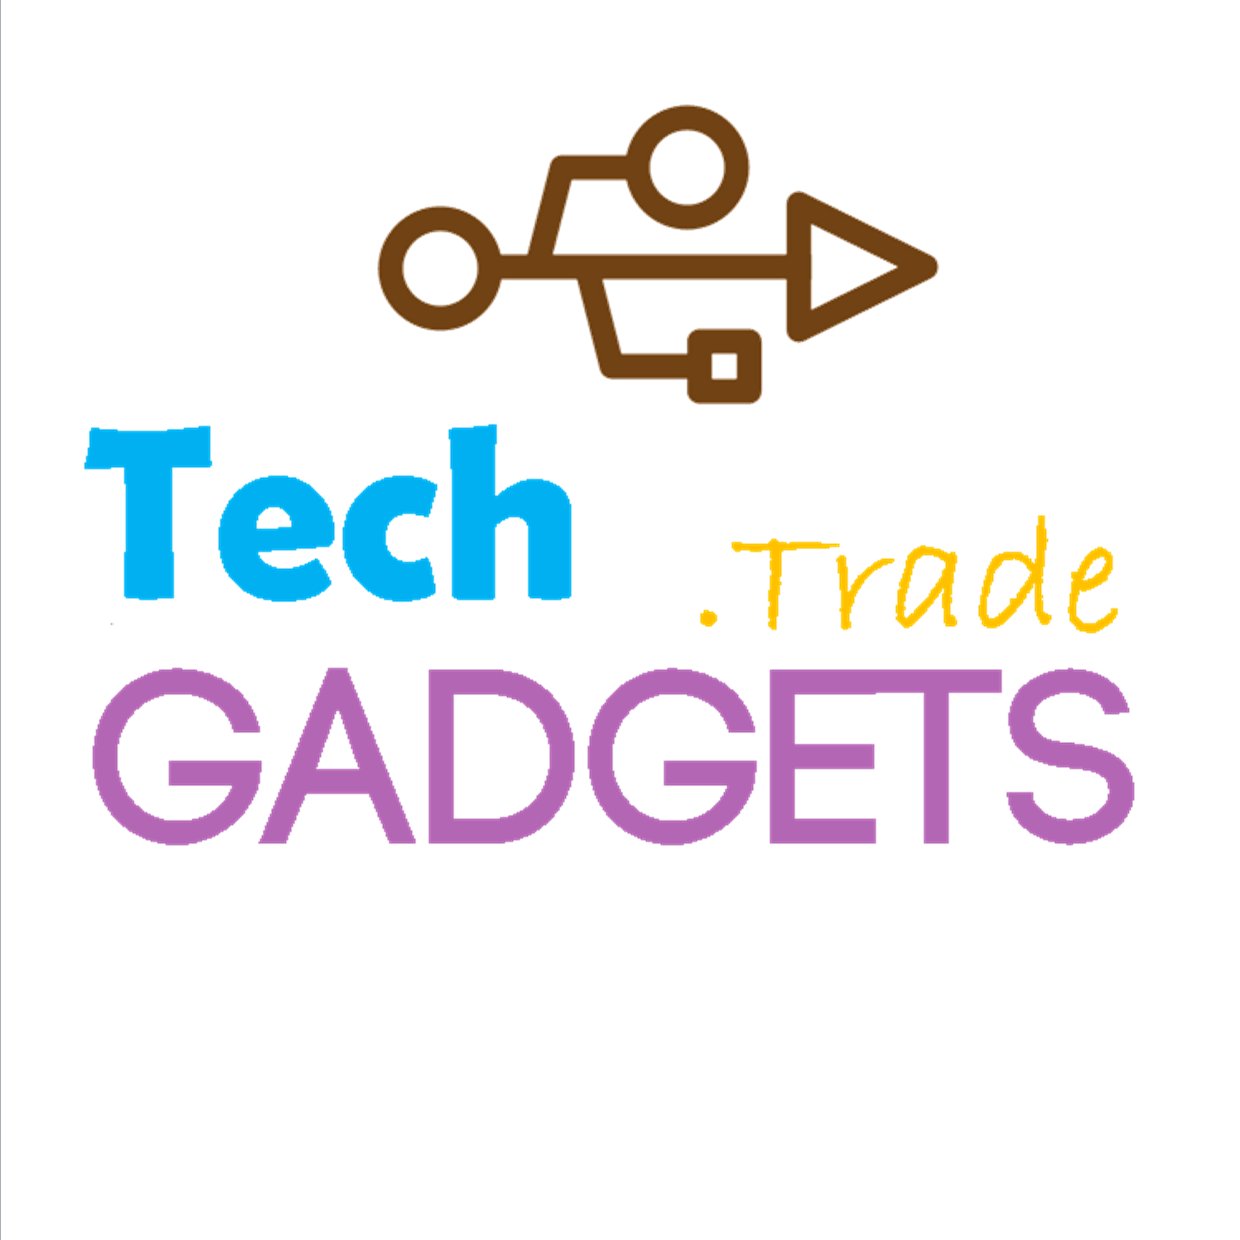 https://t.co/8J1X5NdbRm is an Australian Online Retailer of Tech, Electronics, Gadgets and other cool stuff. Free Delivery on all products Australia wide.